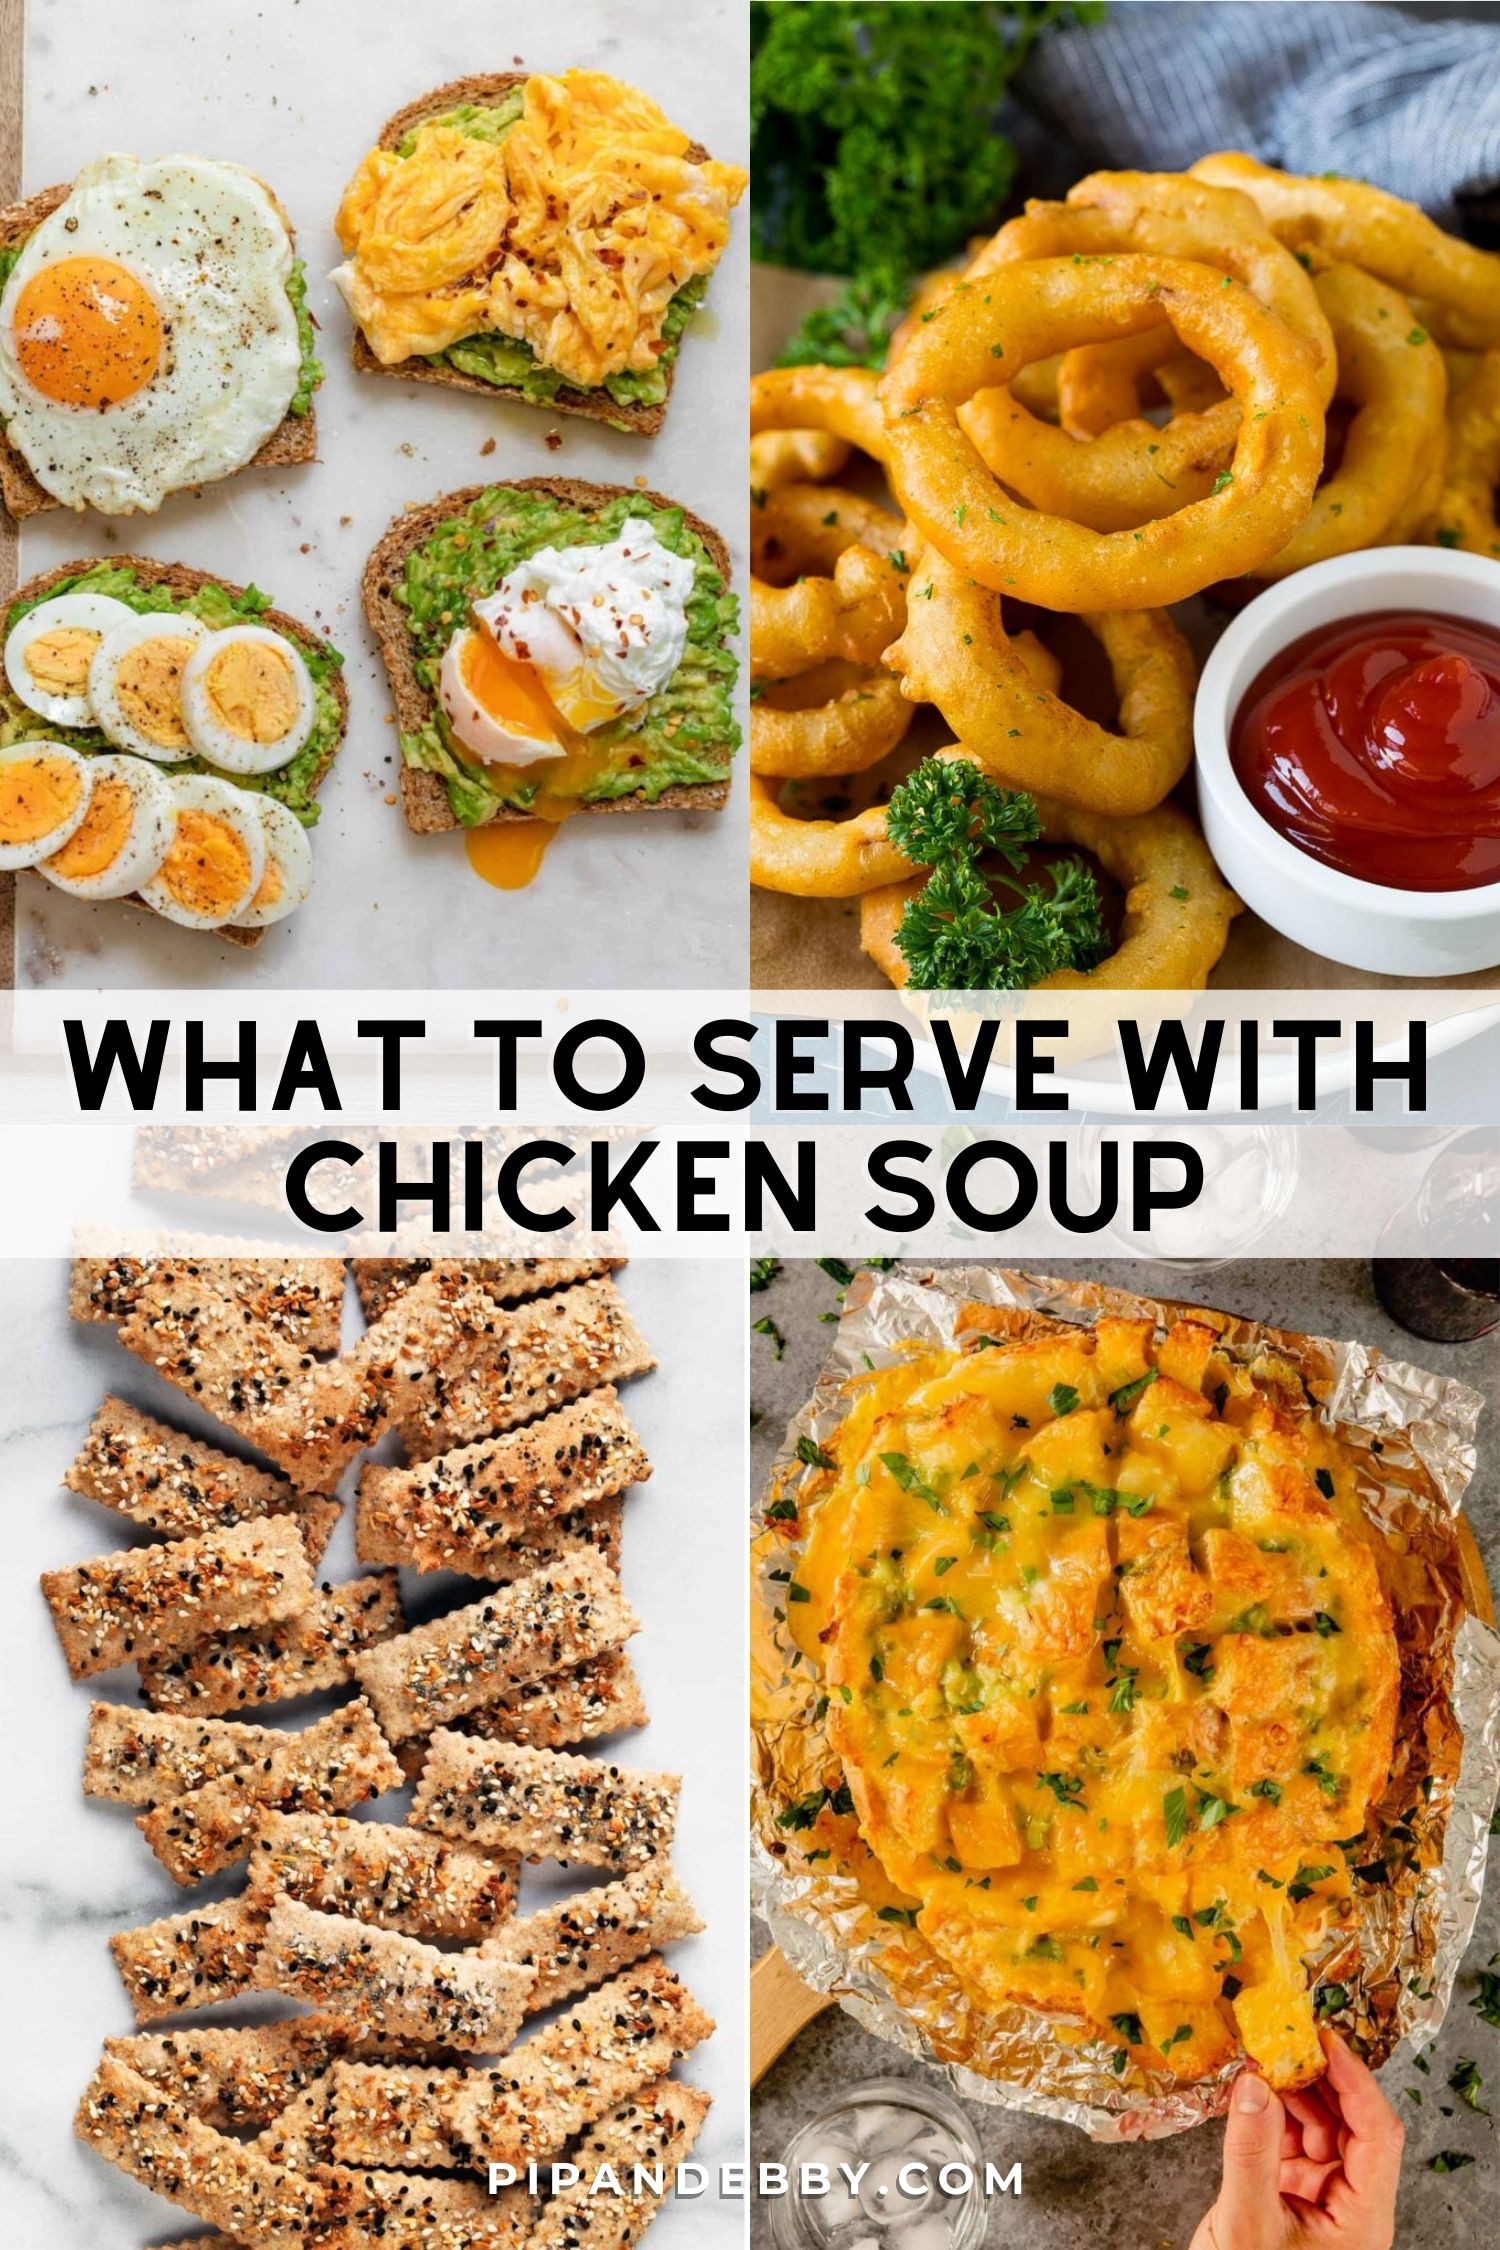 Four food photos in a grid with text overlay reading, "What to serve with chicken soup."